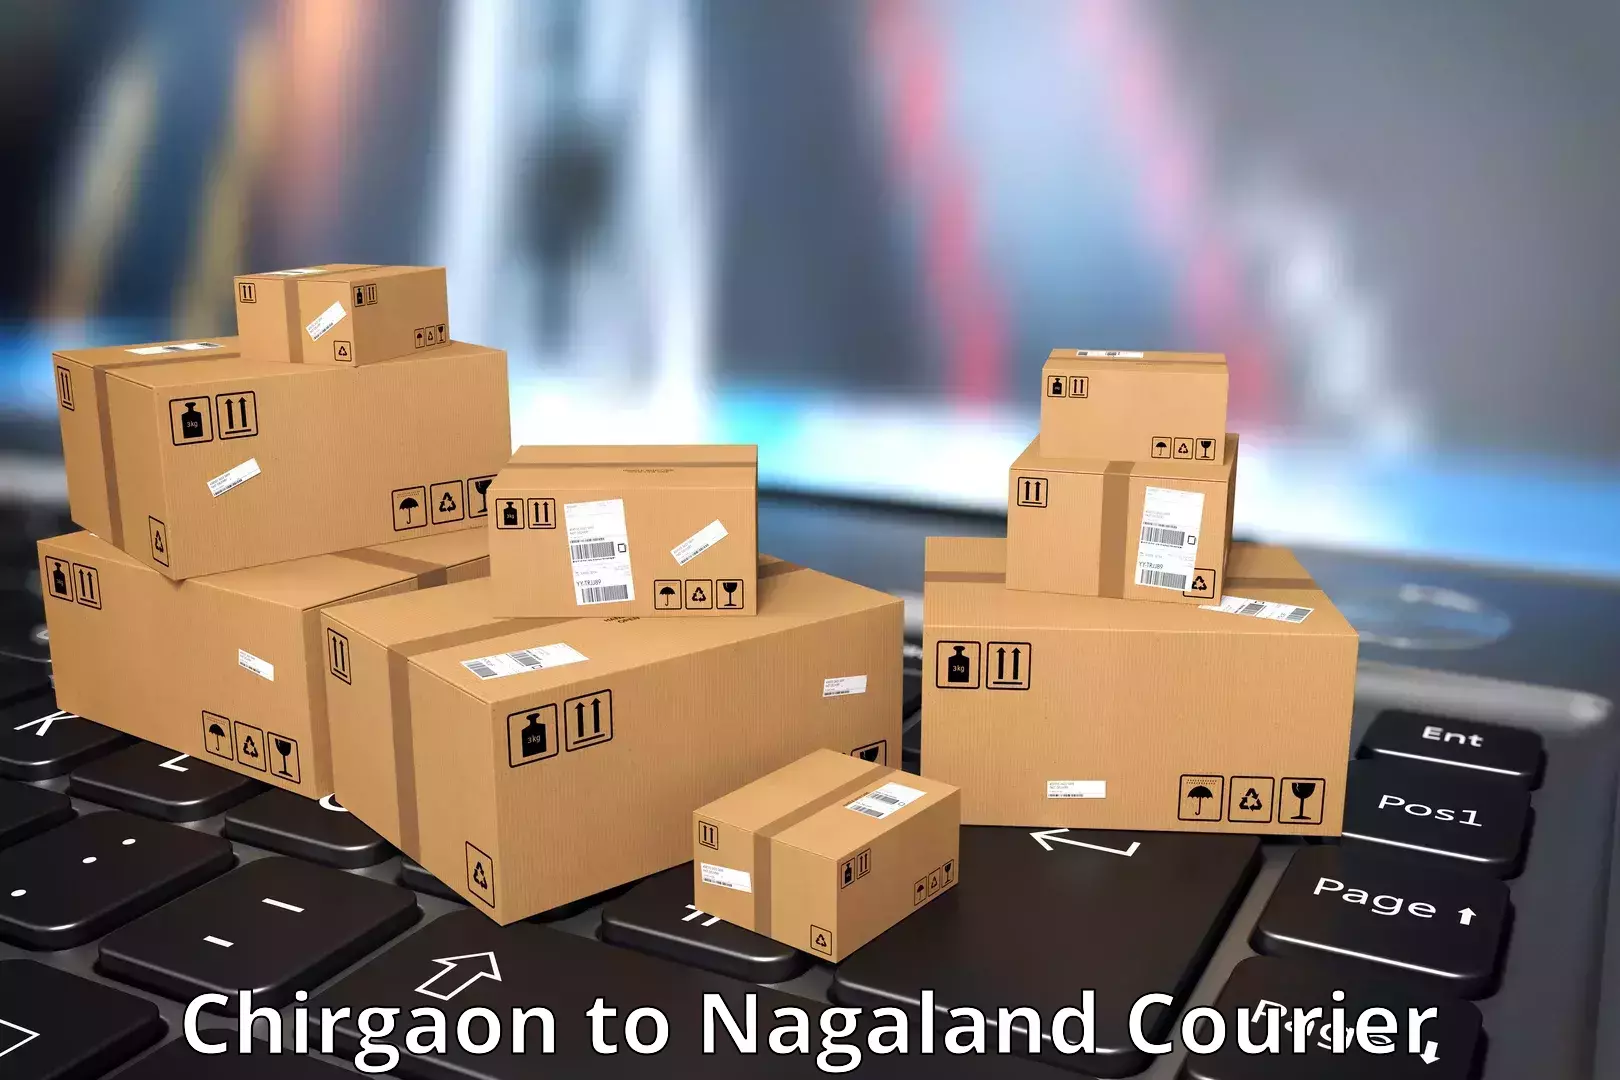 Business delivery service Chirgaon to Nagaland